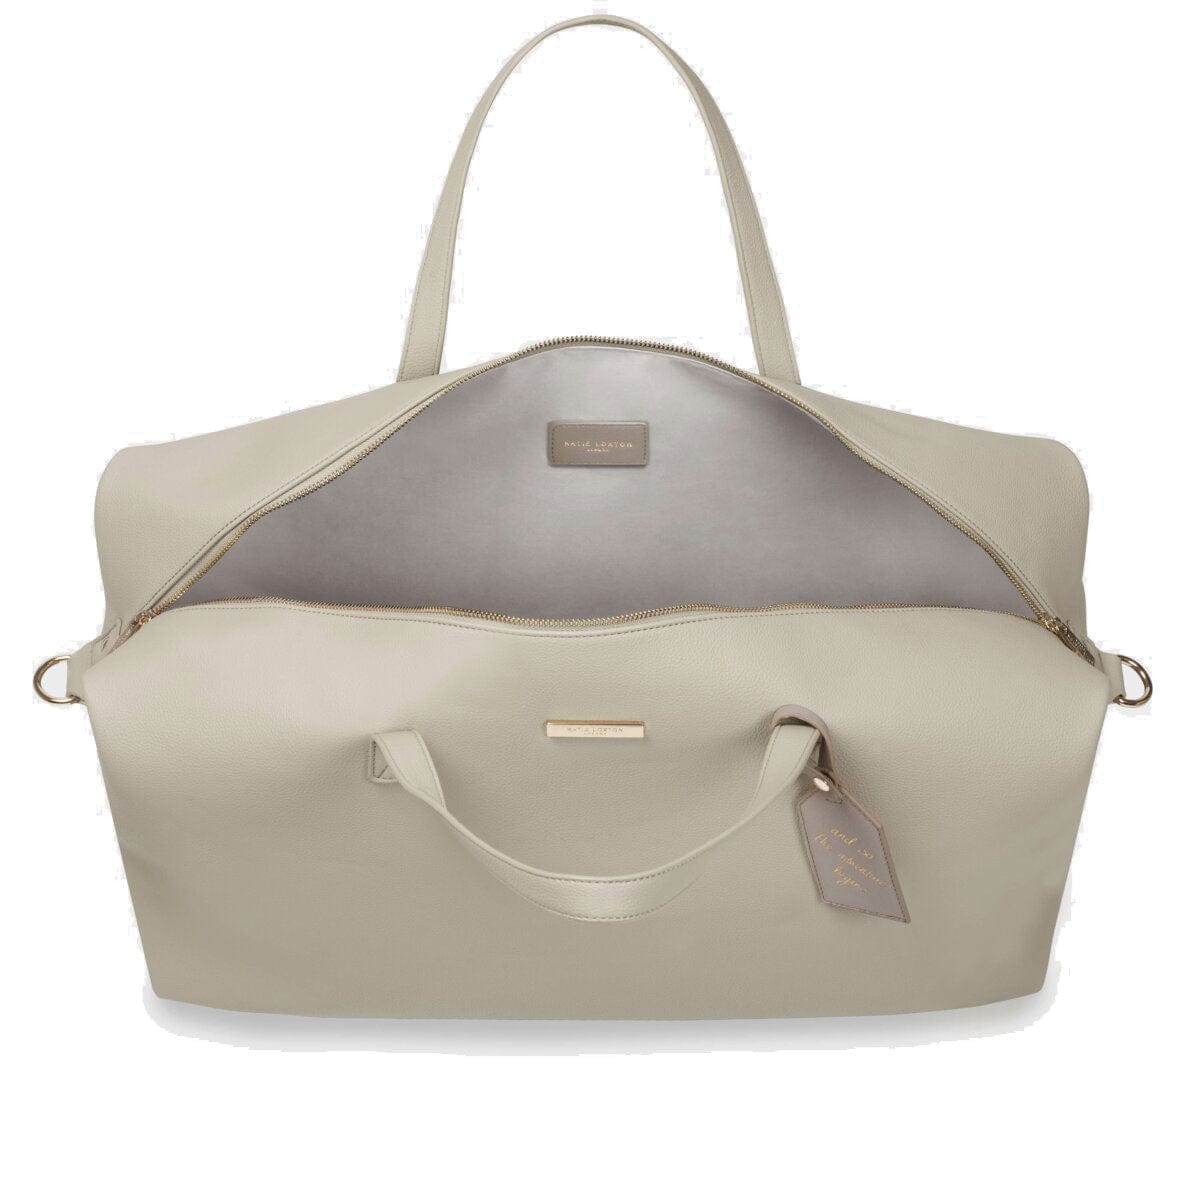 Katie Loxton Holdall Katie Loxton Weekend Holdall Duffle Bag - Taupe